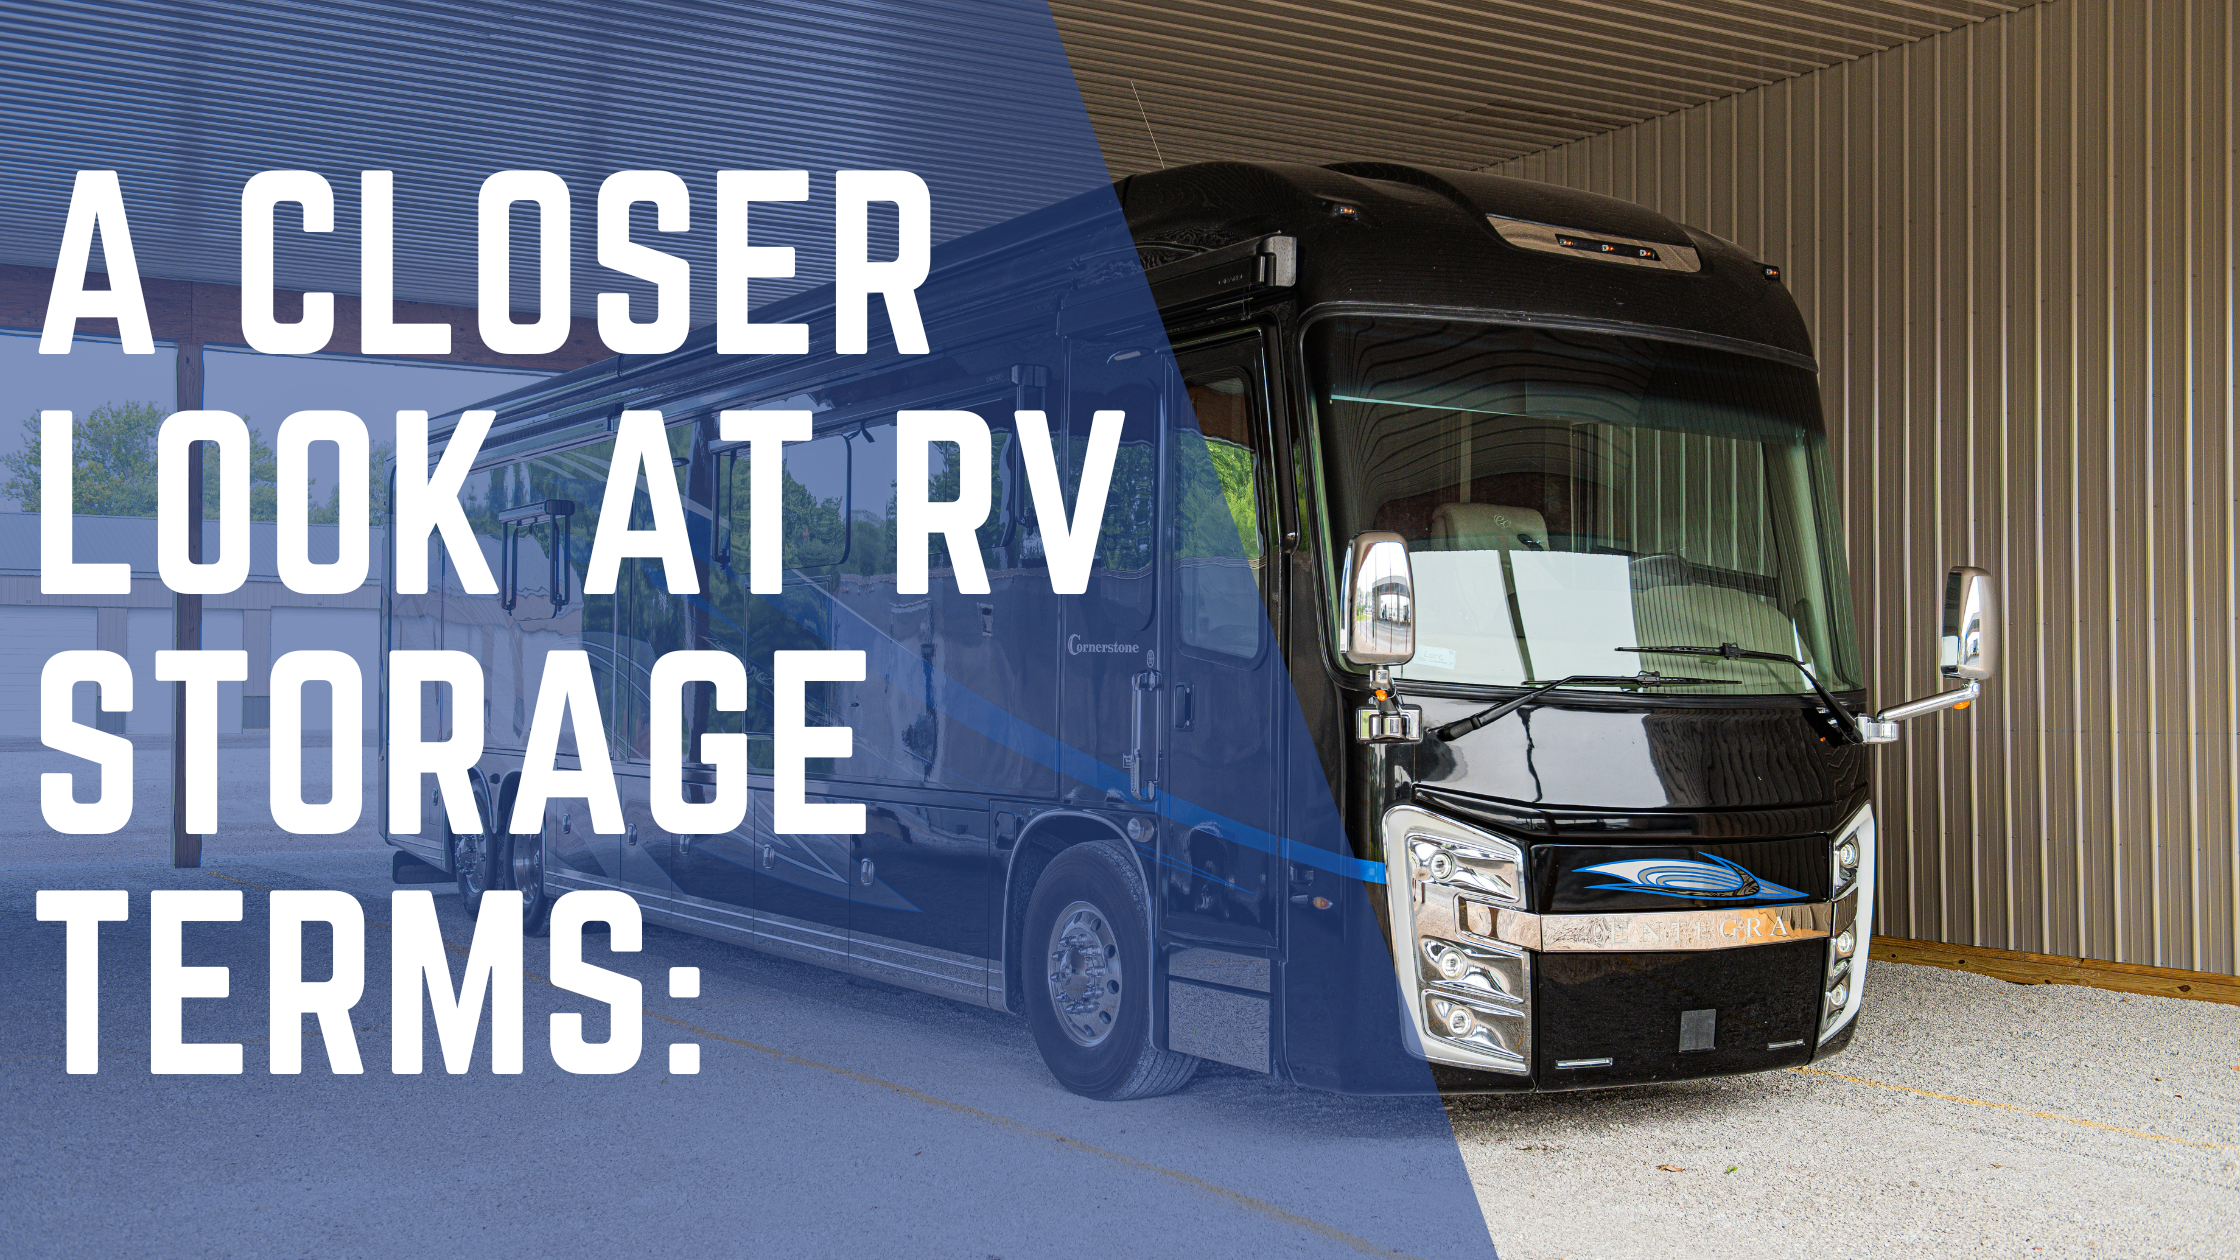 A Closer Look at RV Storage Terms